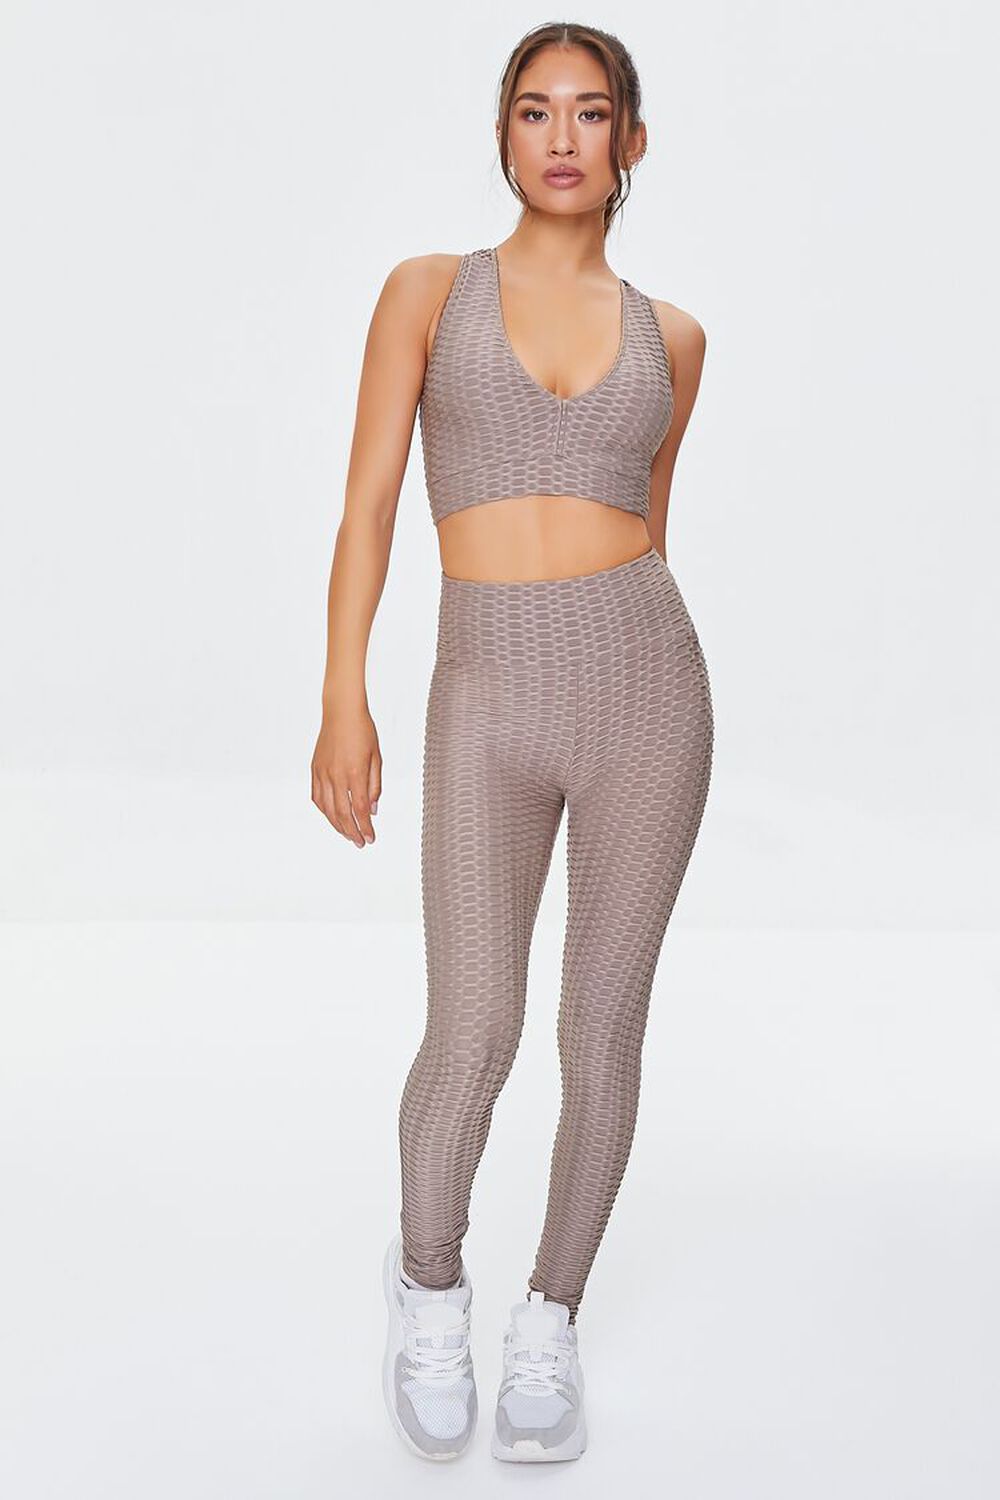 TAUPE Active Honeycomb Leggings, image 1